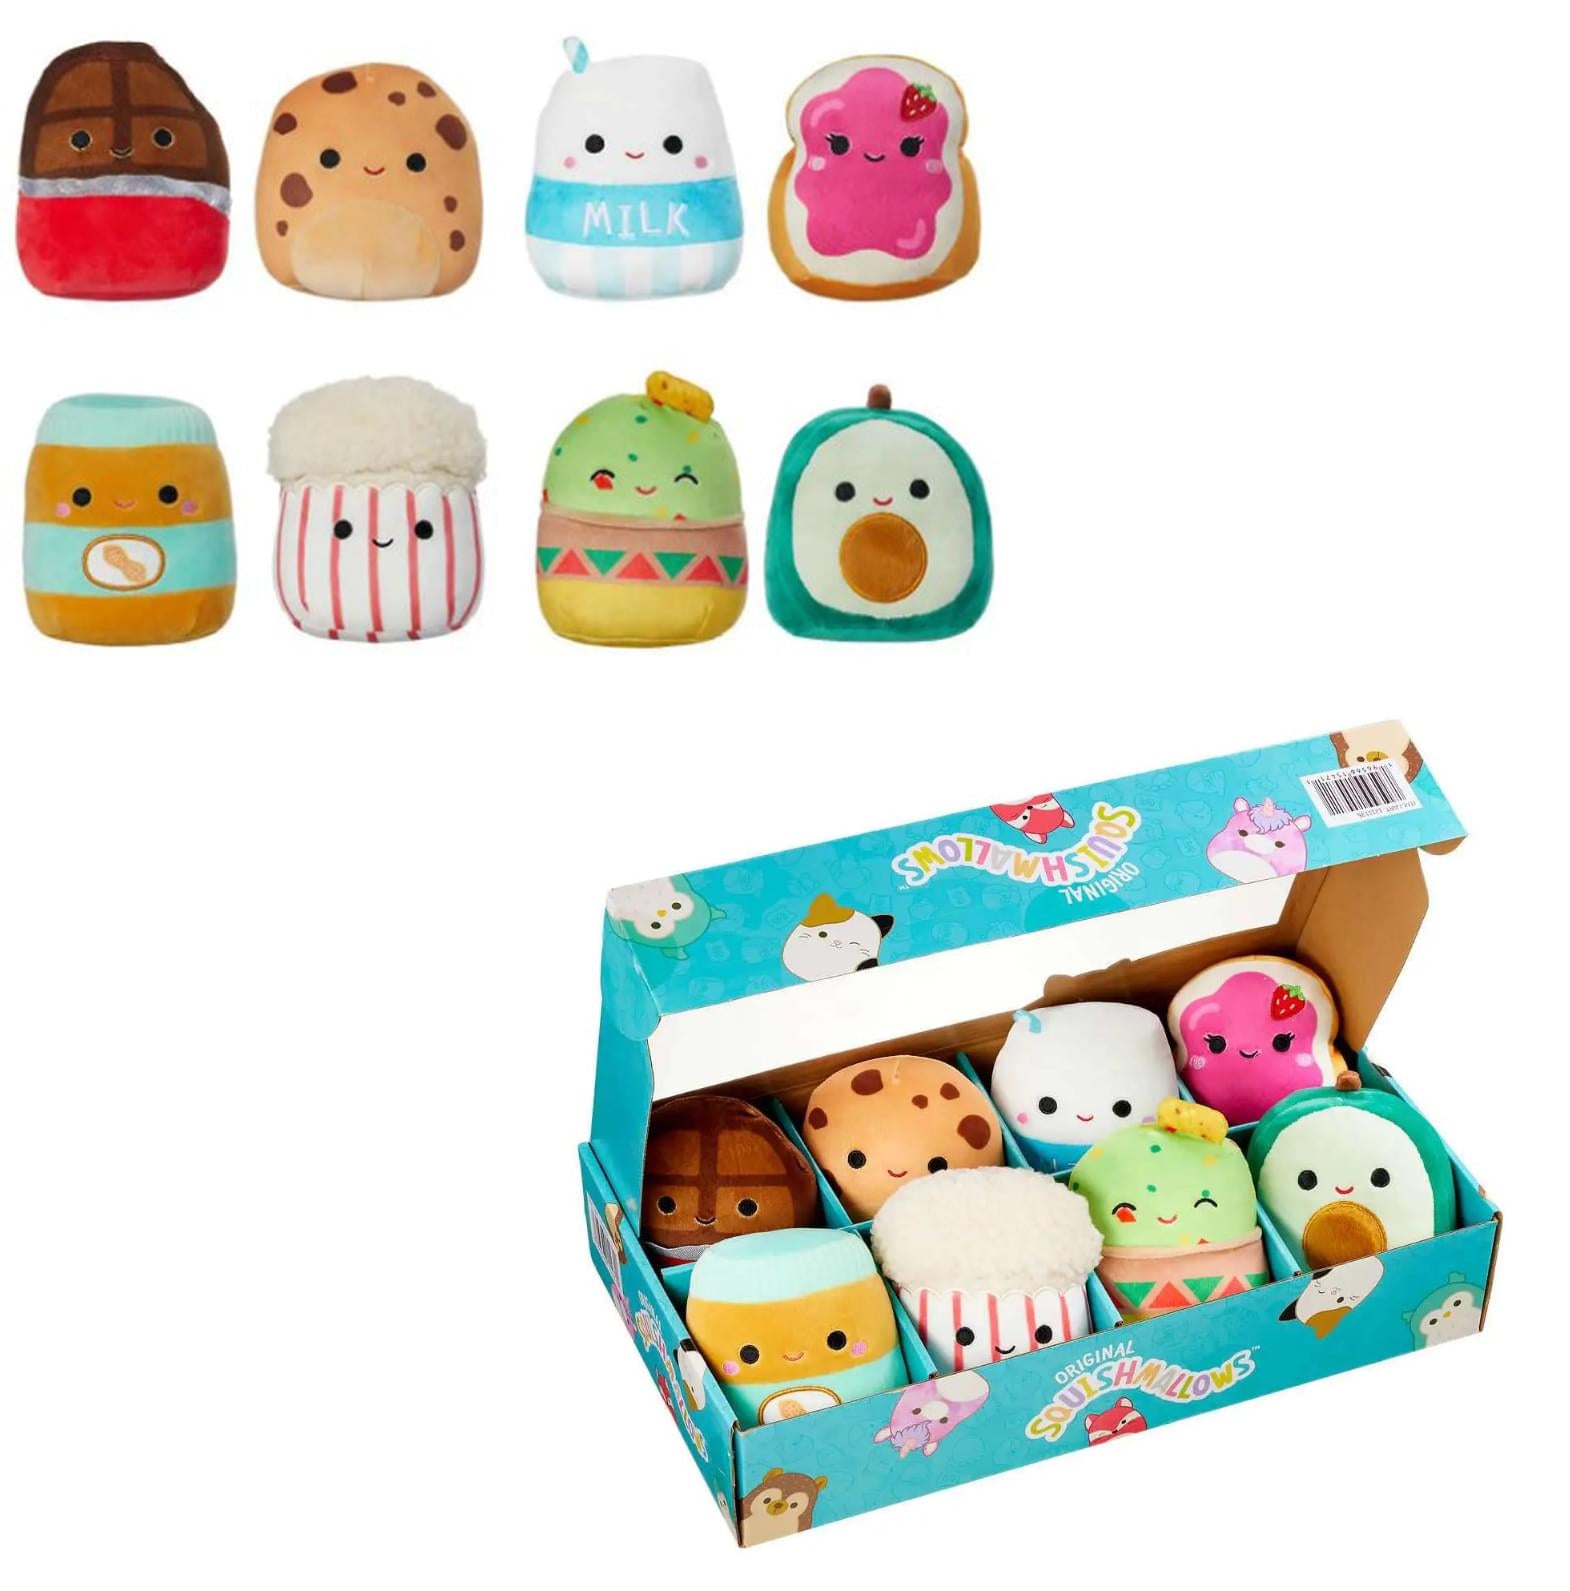  Squishmallows Official Box Set of 8 - 5 inch 5 Favorites Squishmallows  Pack (Greta, Patty, Brian, Pilar, Joelle, Tabitha, Meadow, Avery) : Toys &  Games